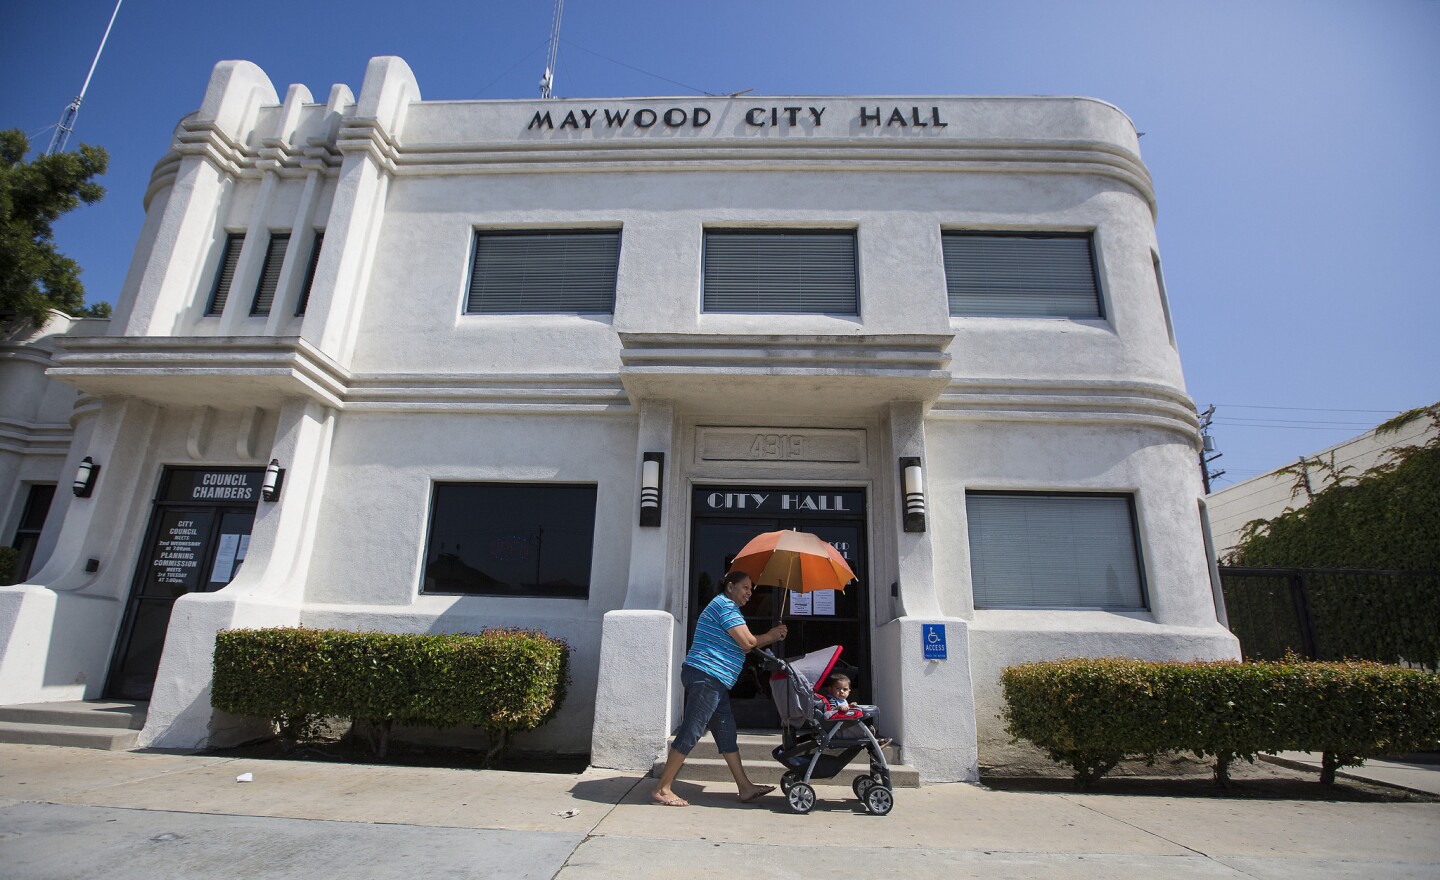 State auditors say staff at Maywood City Hall have been late with payments and failed to alleviate the city's financial crisis for years.